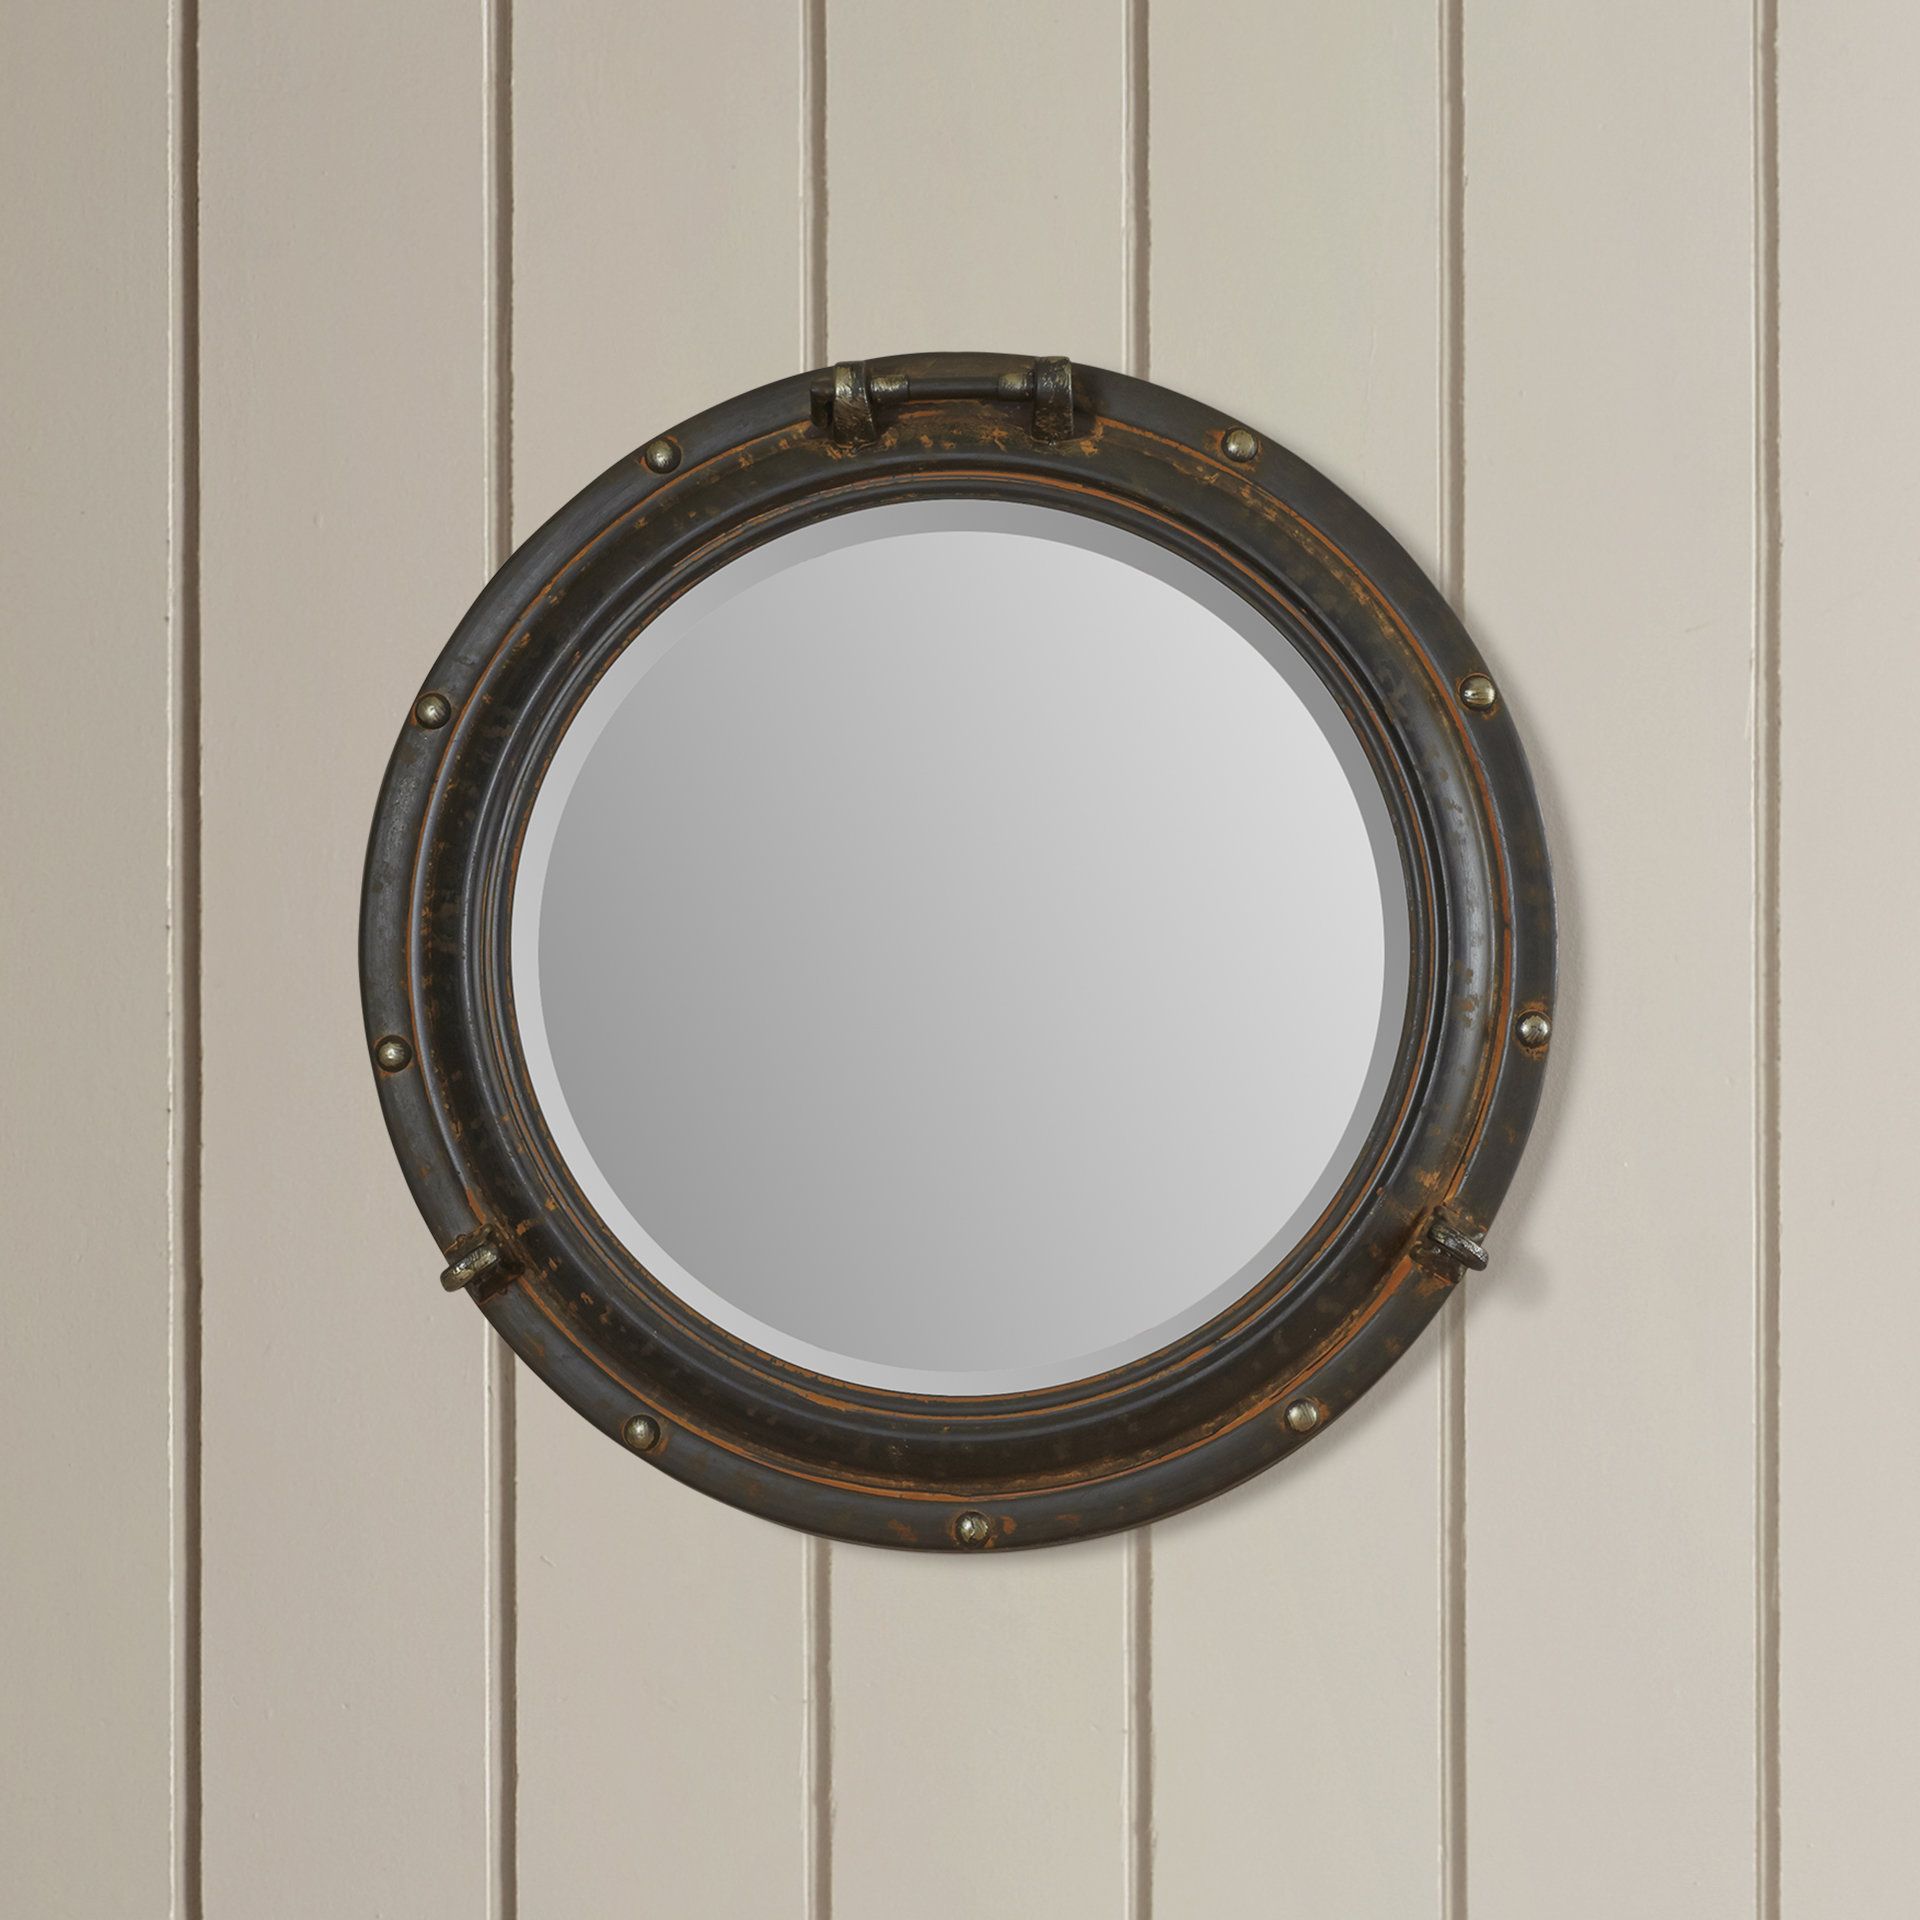 Beachcrest Home Alie Traditional Beveled Distressed Accent Mirror Pertaining To Alie Traditional Beveled Distressed Accent Mirrors (View 2 of 20)